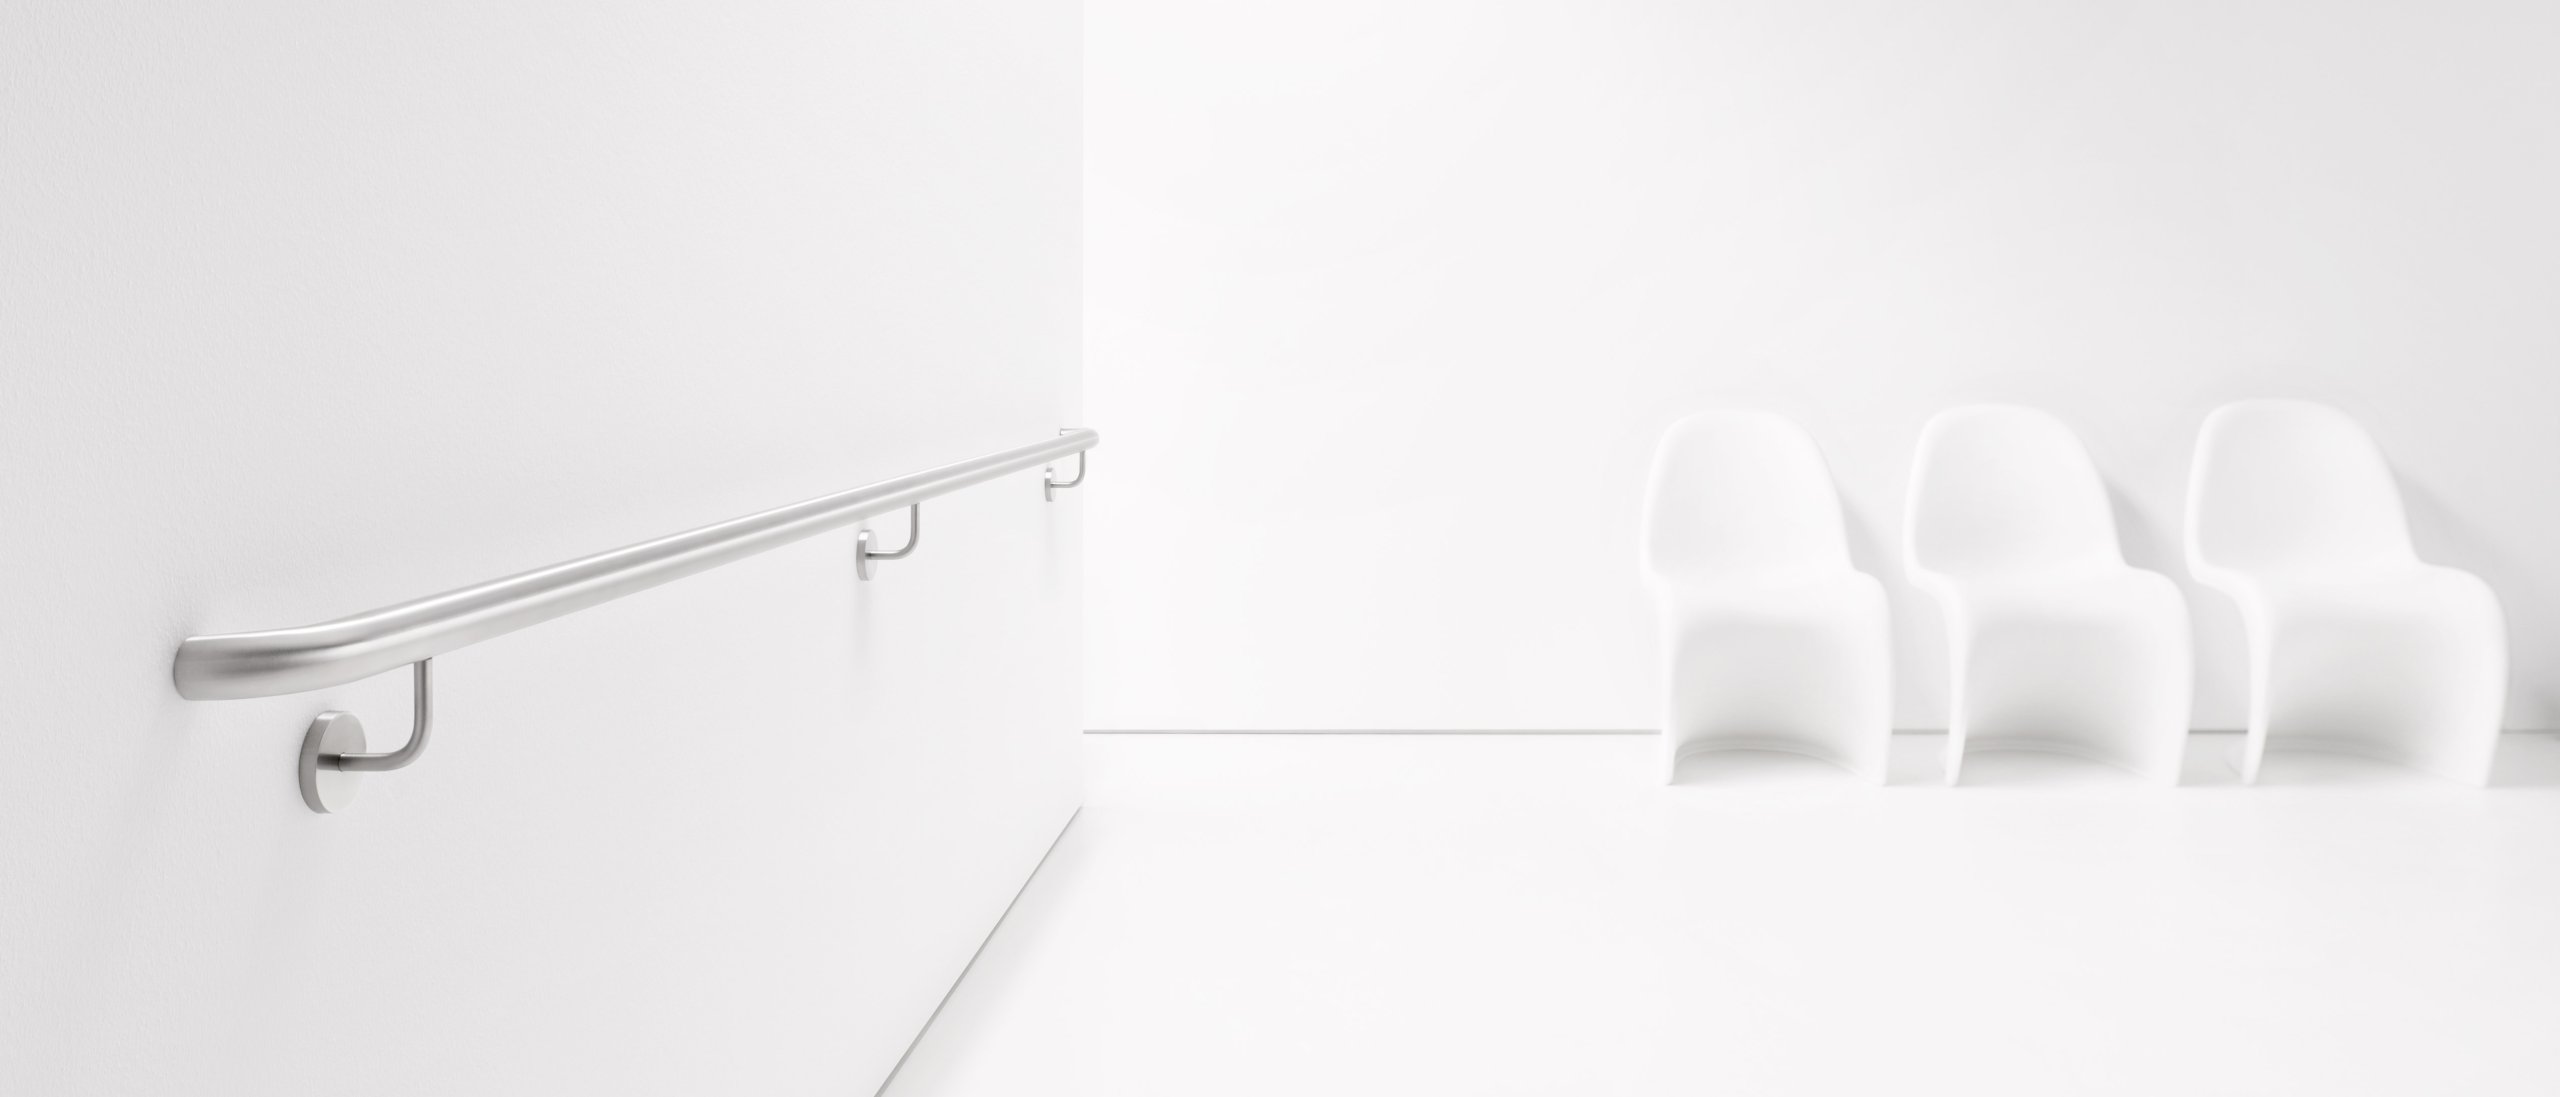 Stainless steel handrail attached to a white wall with three supports